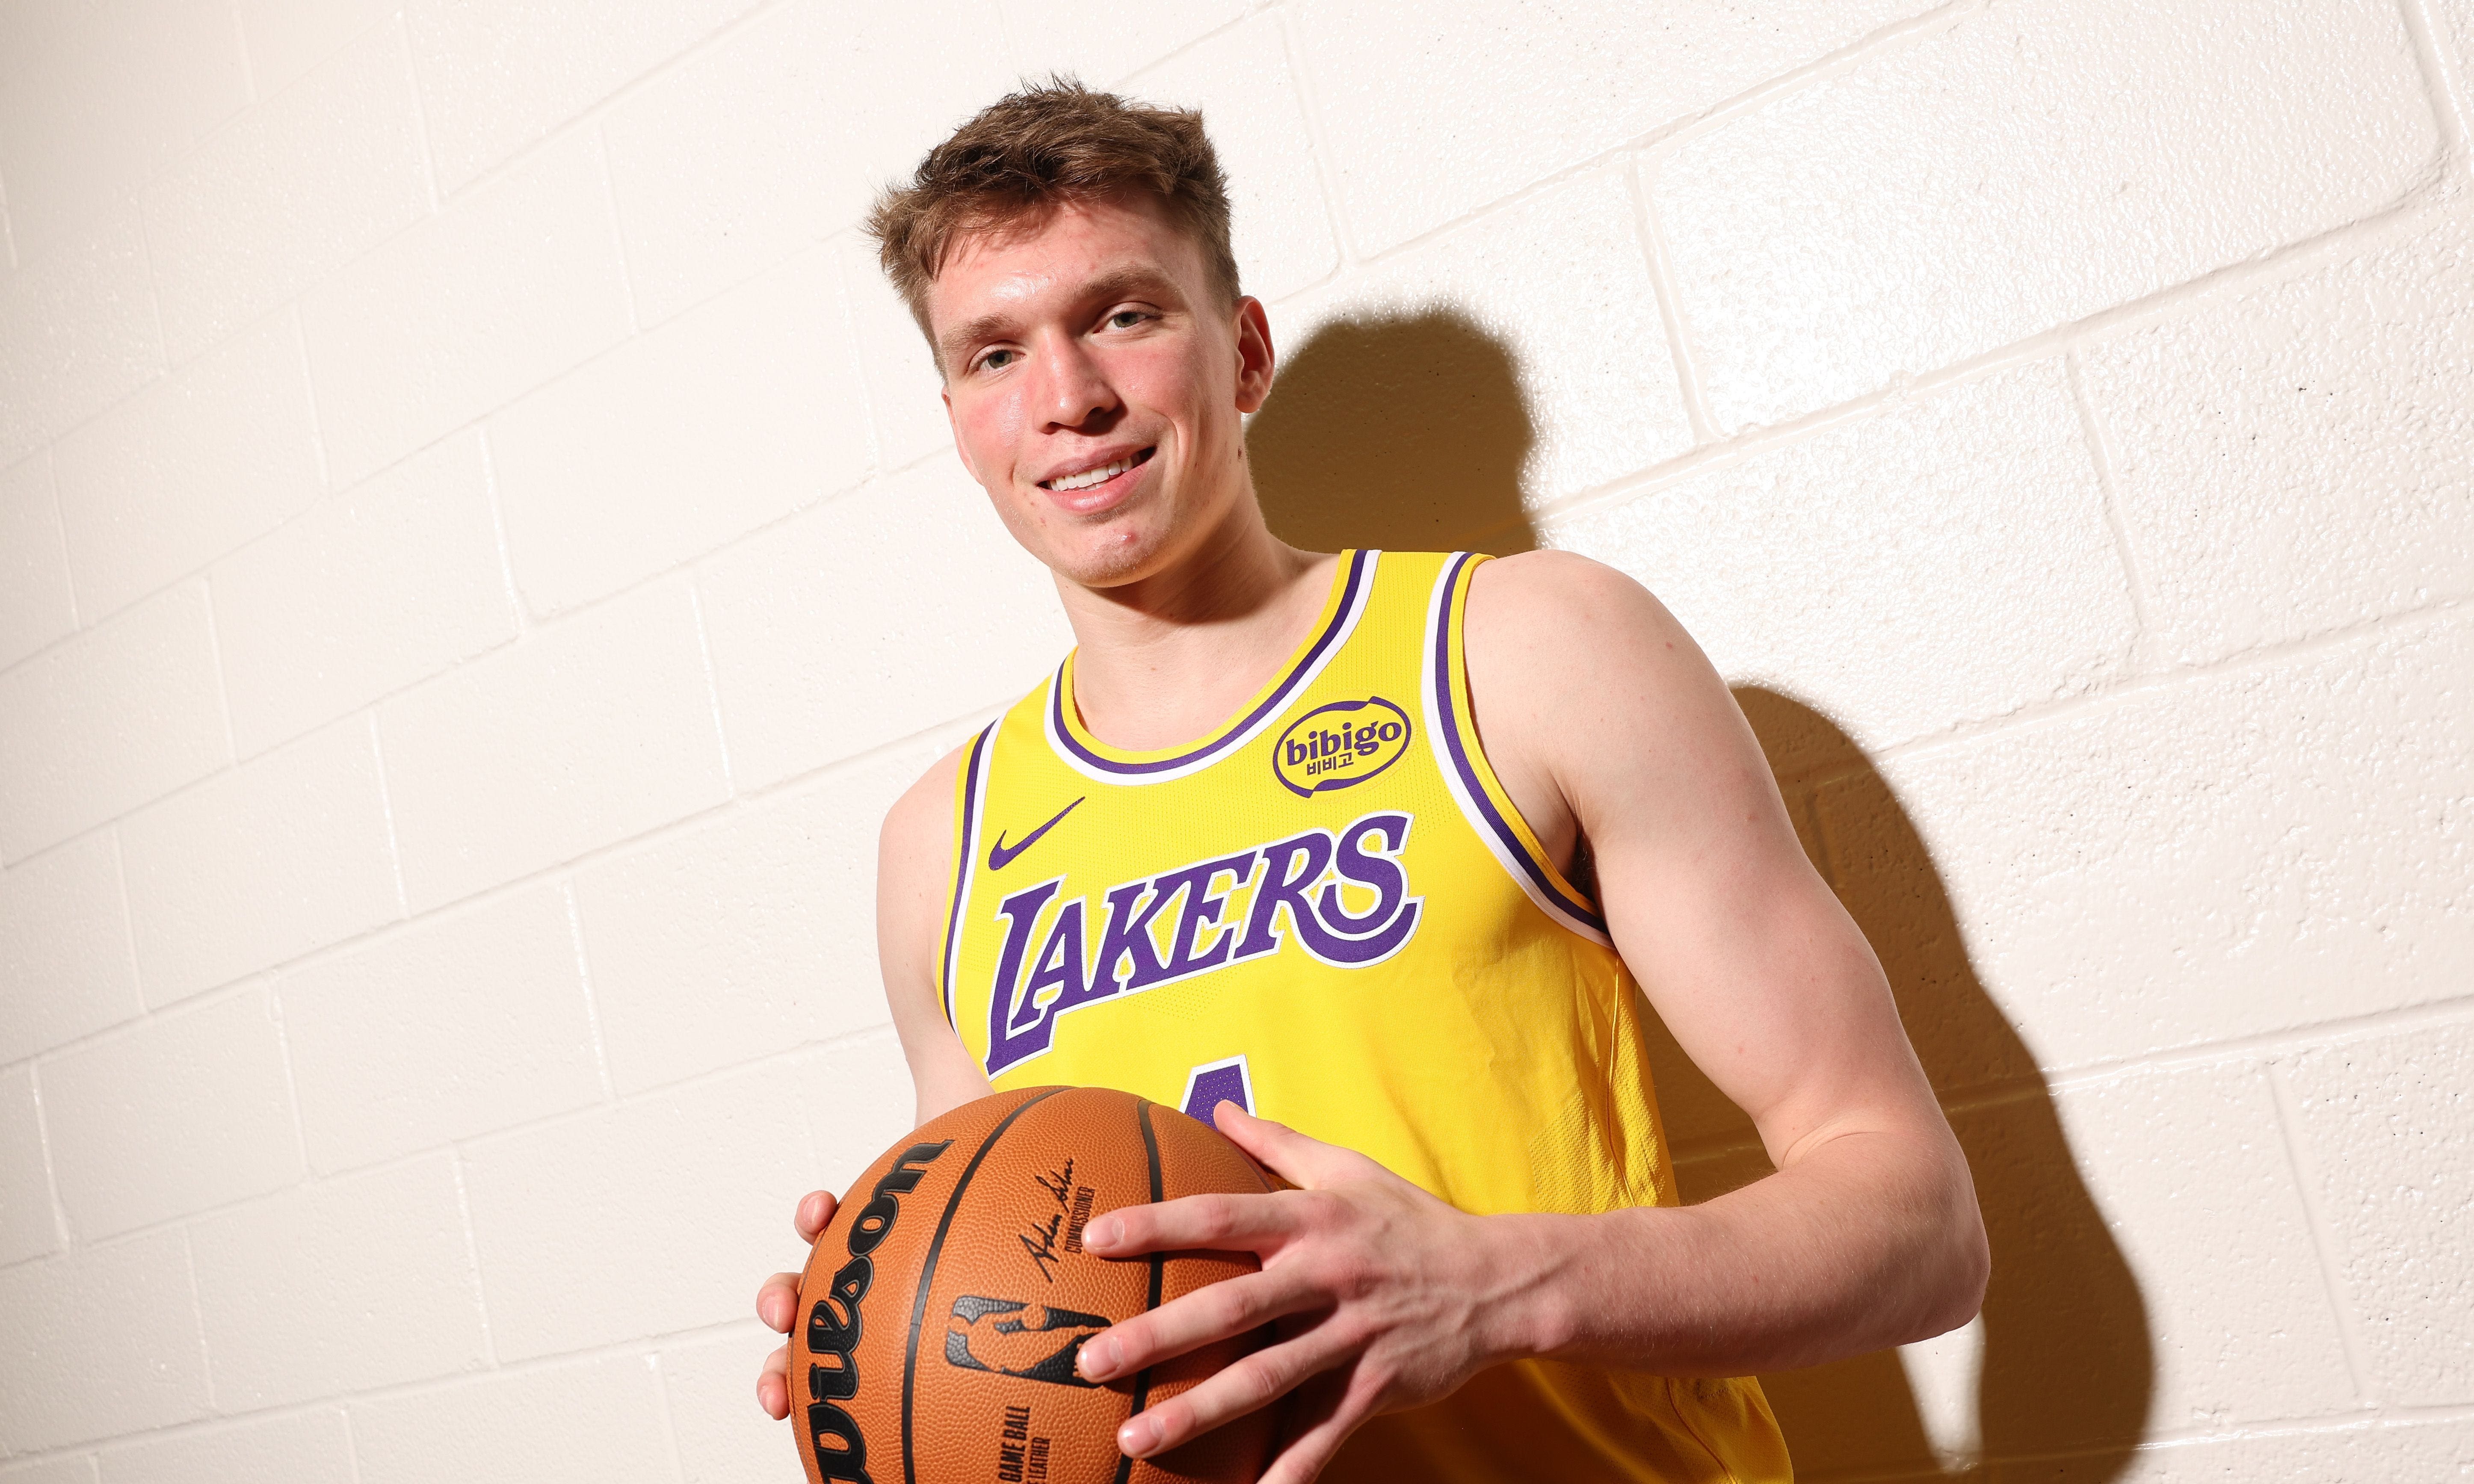 How would Lakers rookie Dalton Knecht describe his game?